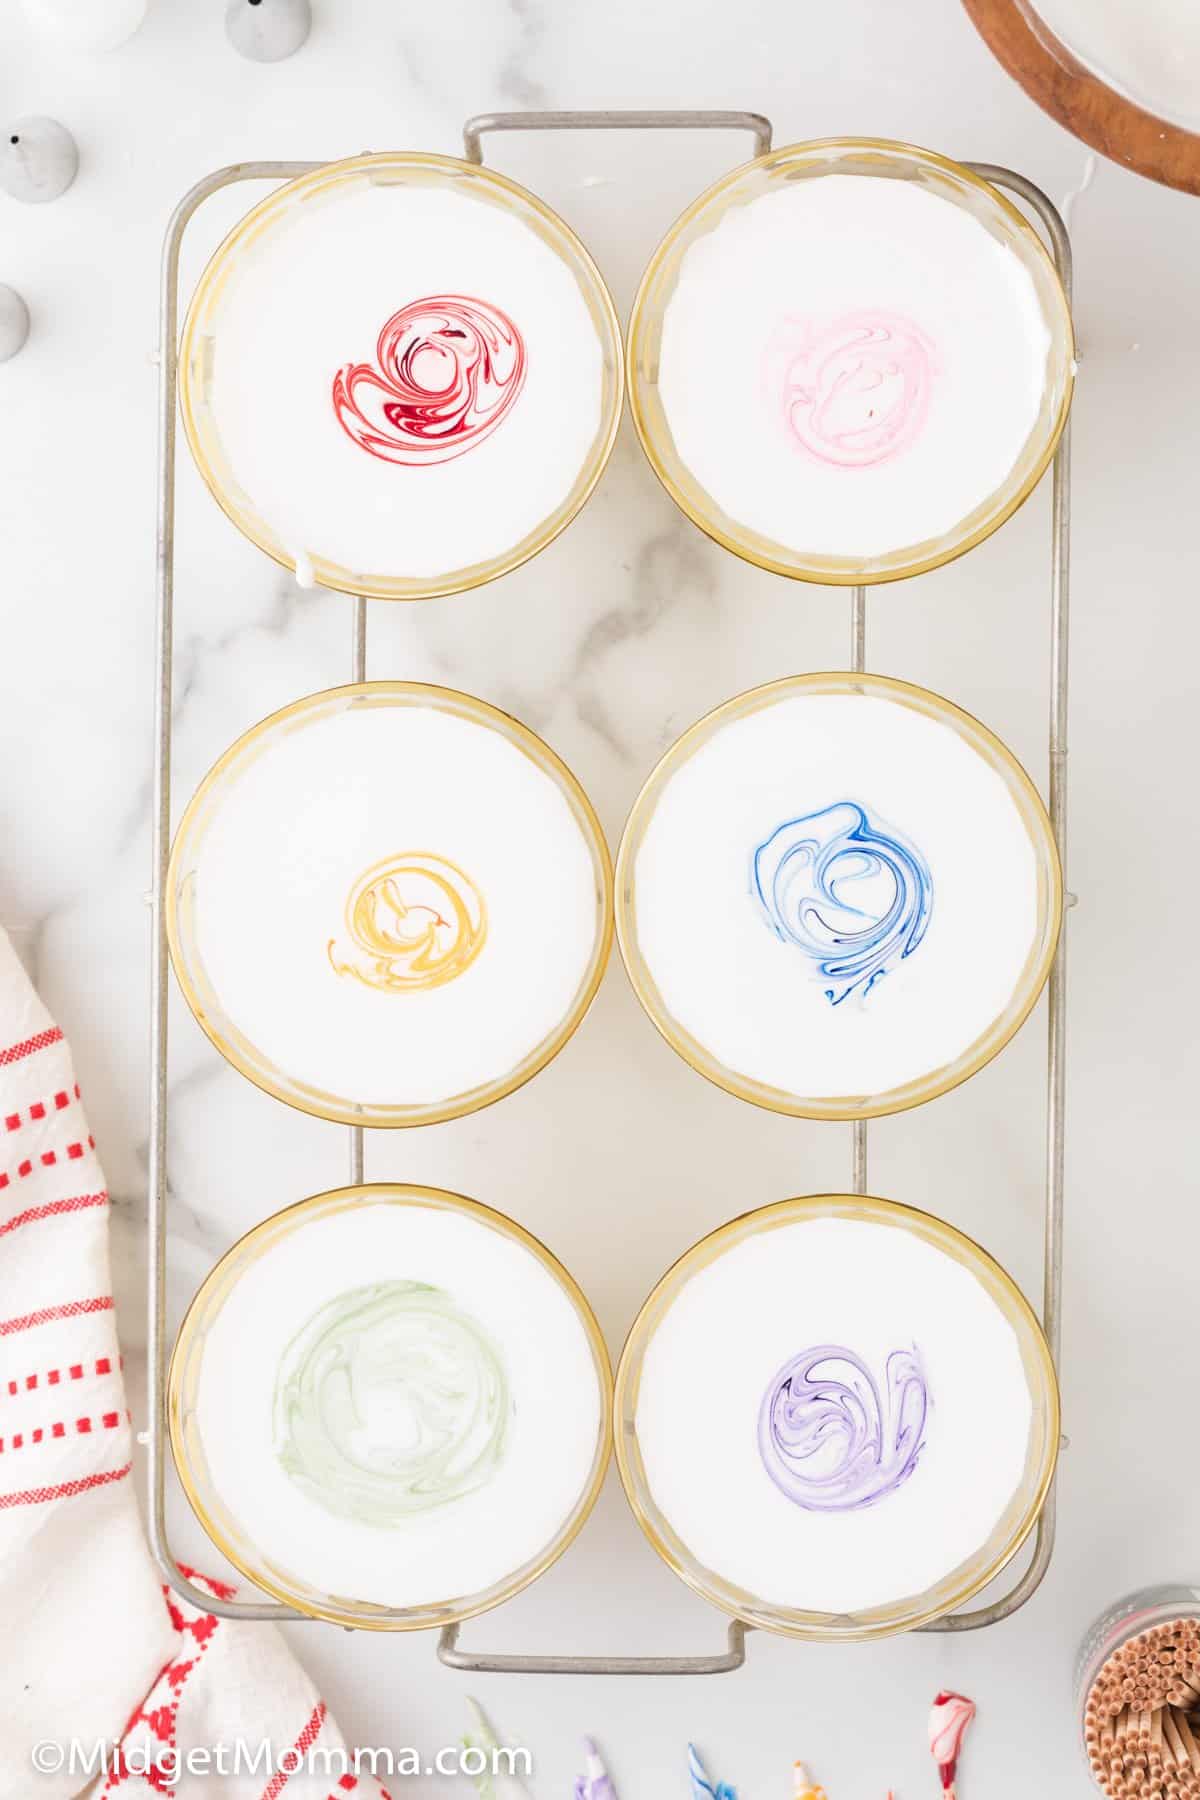 How to Make Royal Icing step - coloring icing